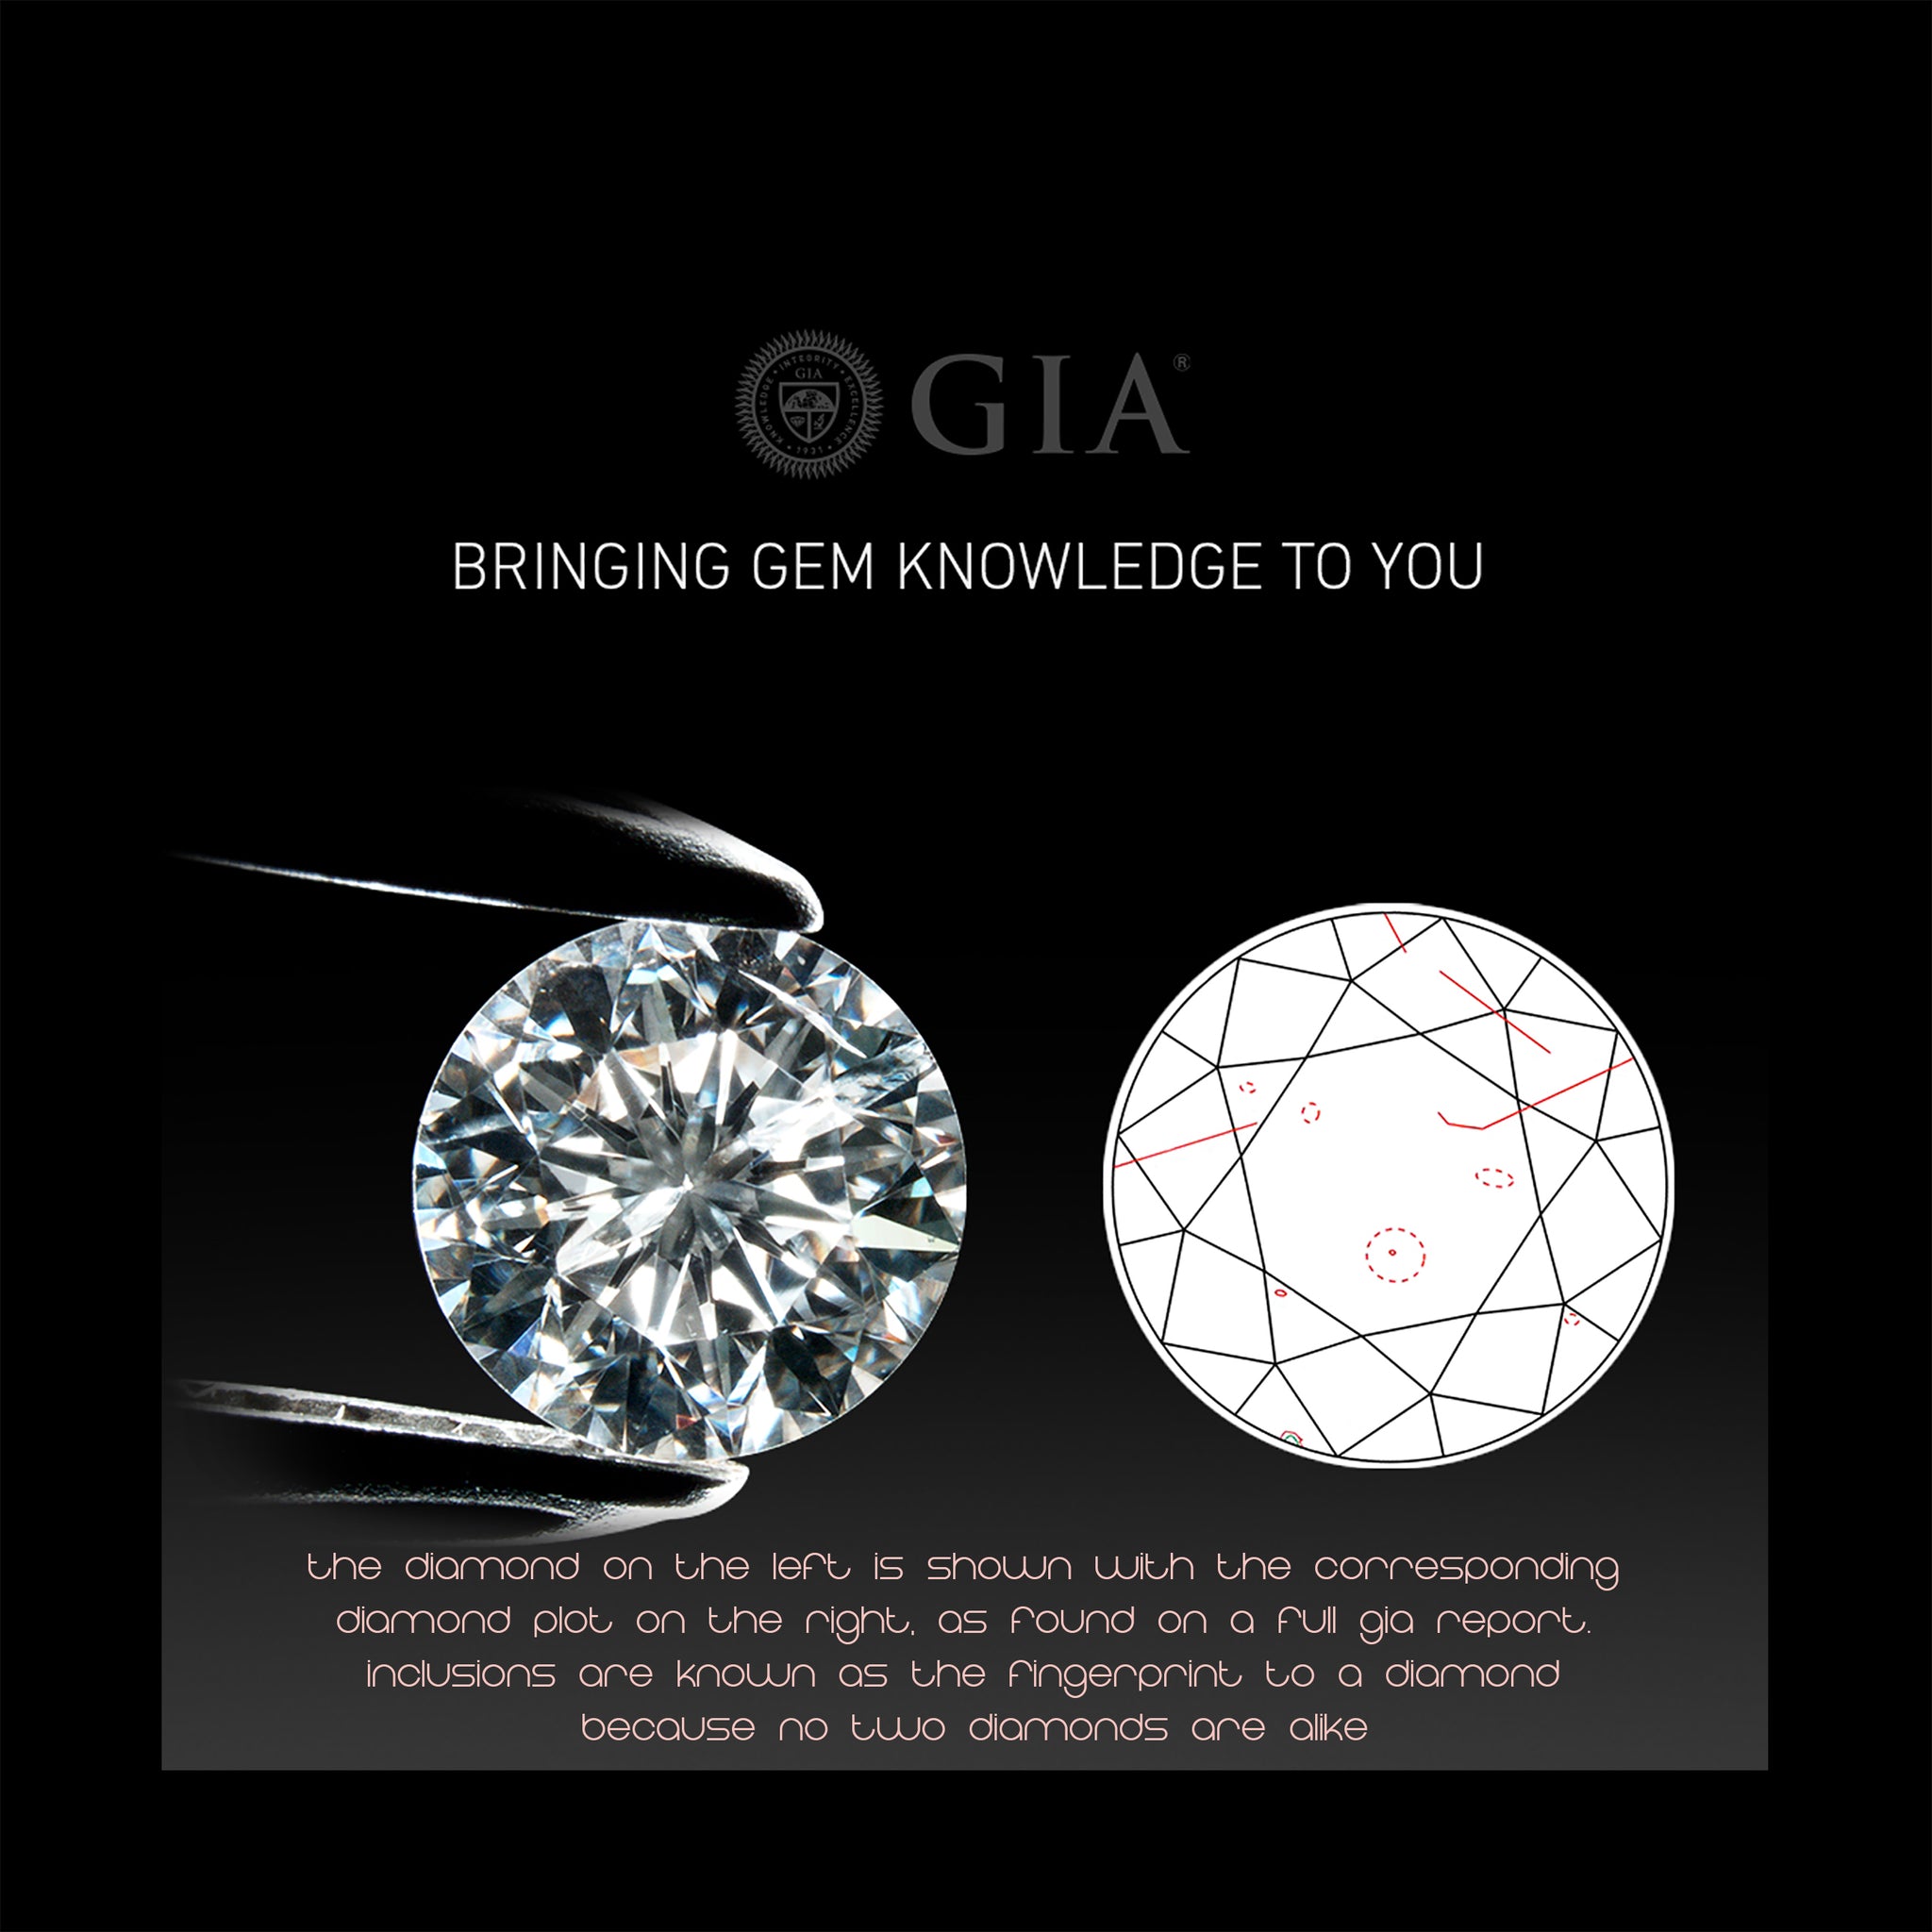 the third most important factor in diamond buying ~ CLARITY